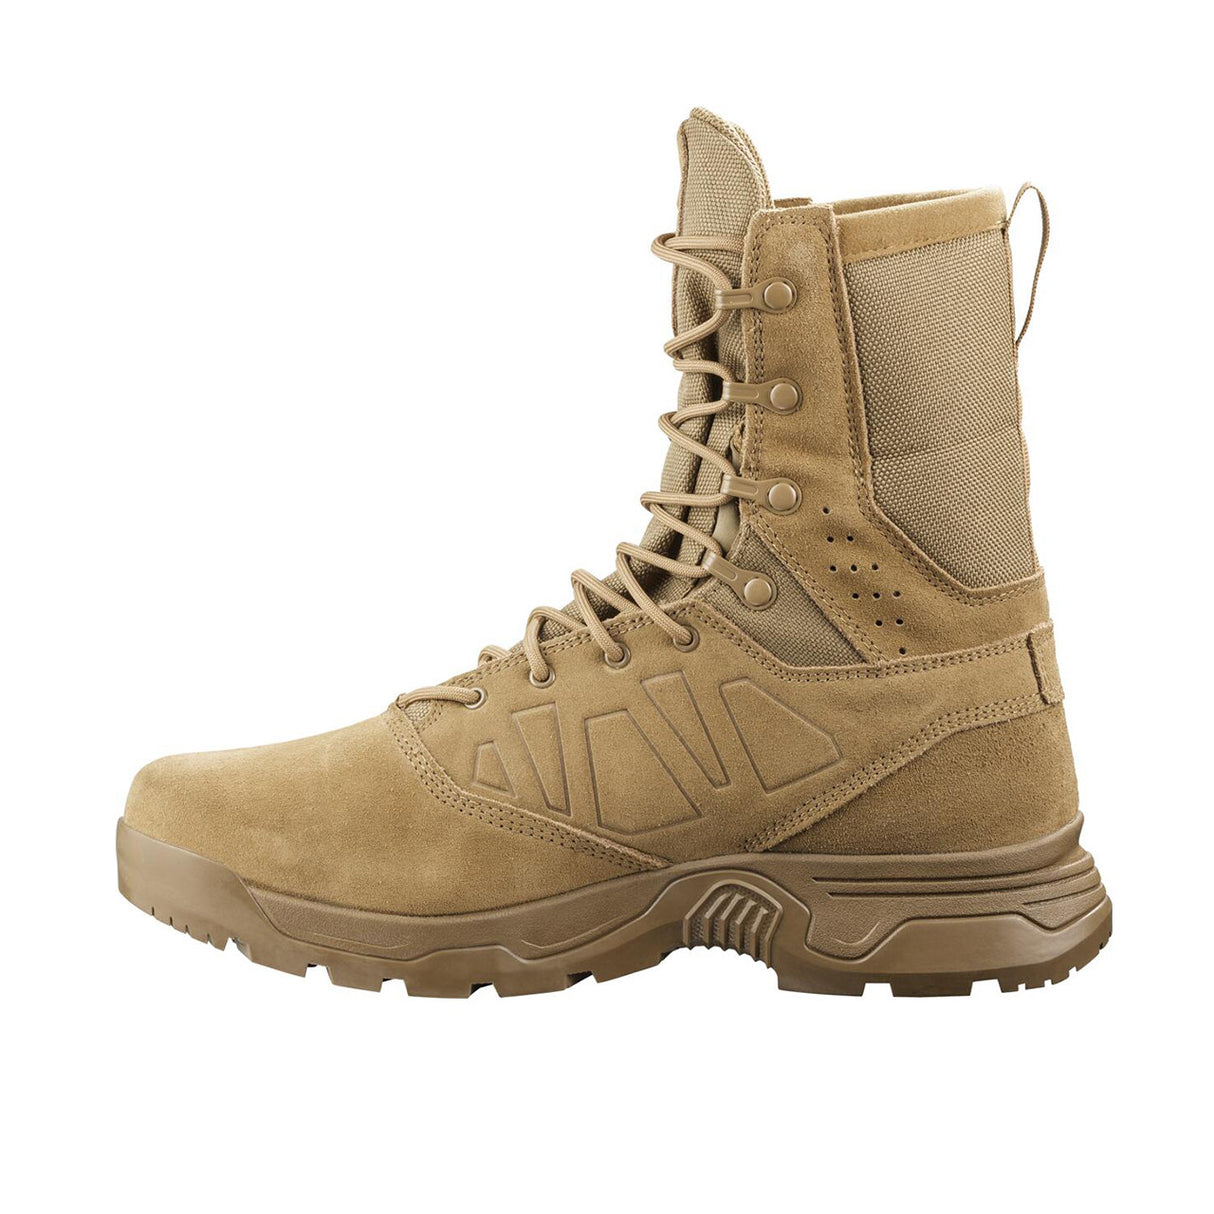 Salomon Guardian CSWP Waterproof Boot - High-performance, waterproof, and durable. Ideal for all terrains.